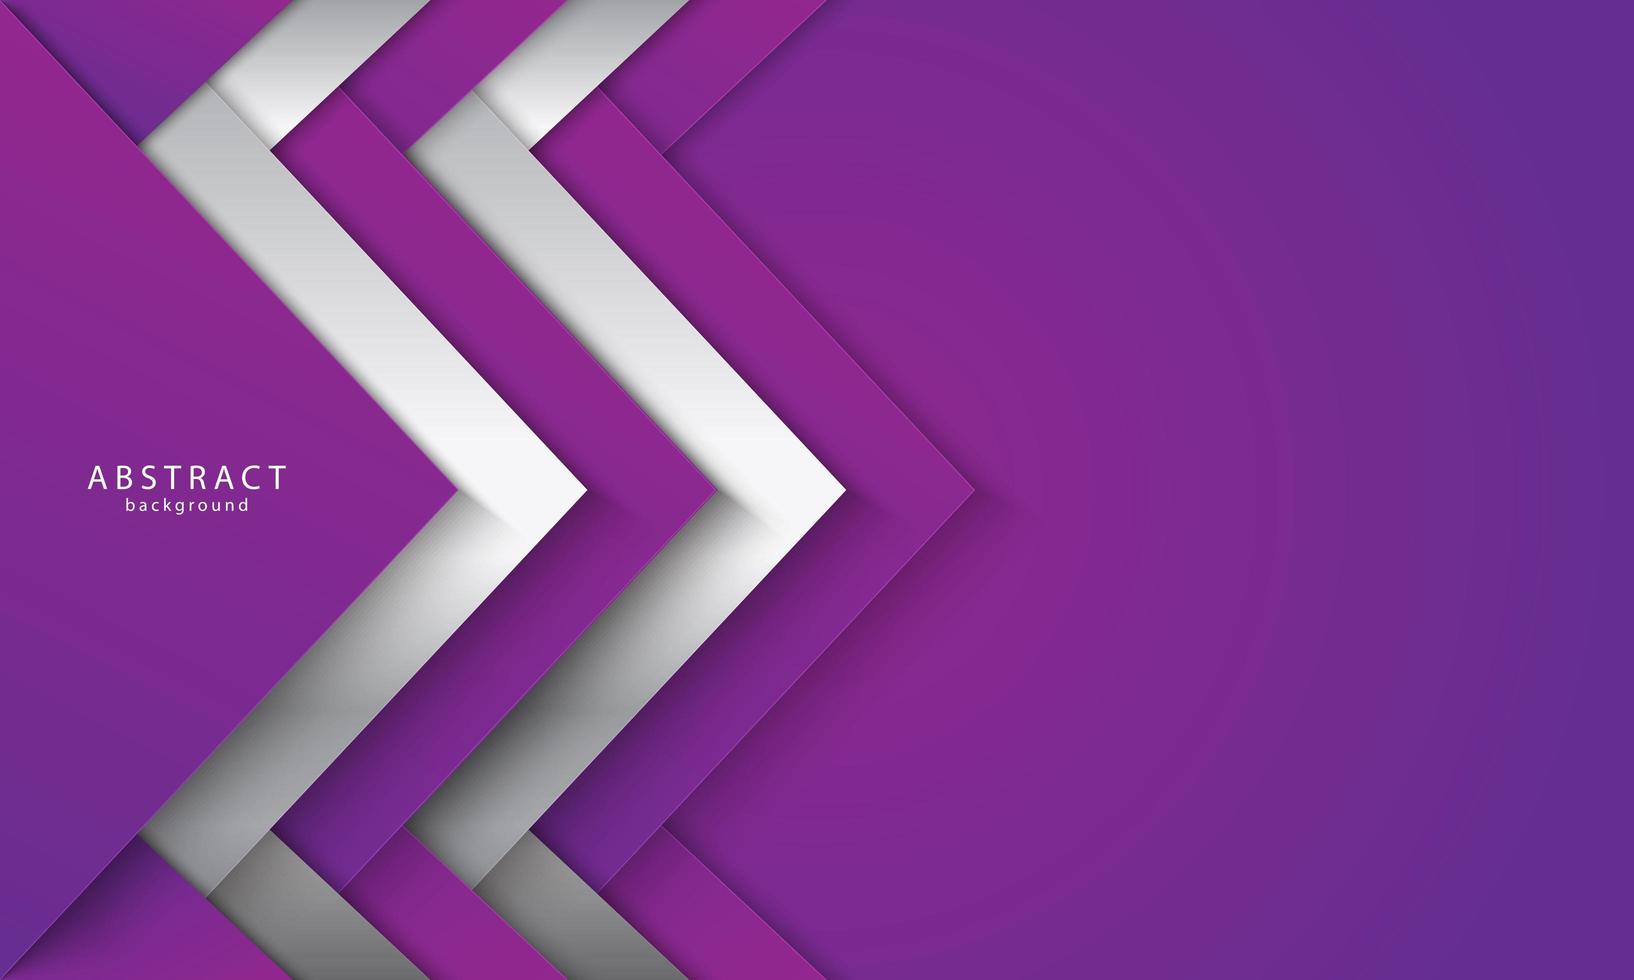 Purple and White Angled Overlapping Shapes vector